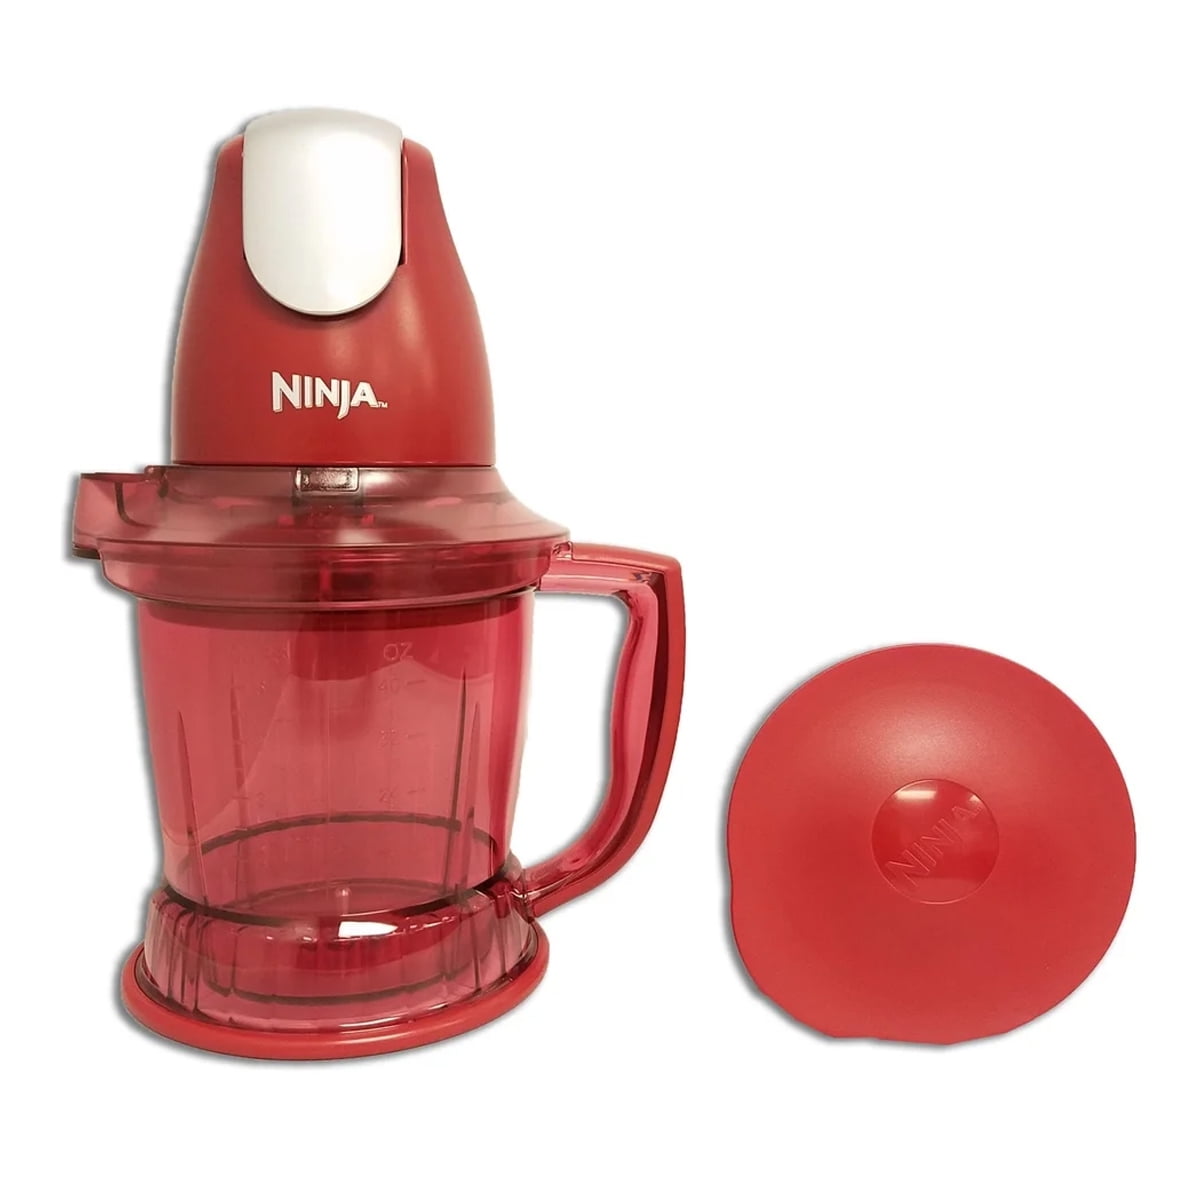 Mix, blend, and more in Ninja's combo food processor back at $90